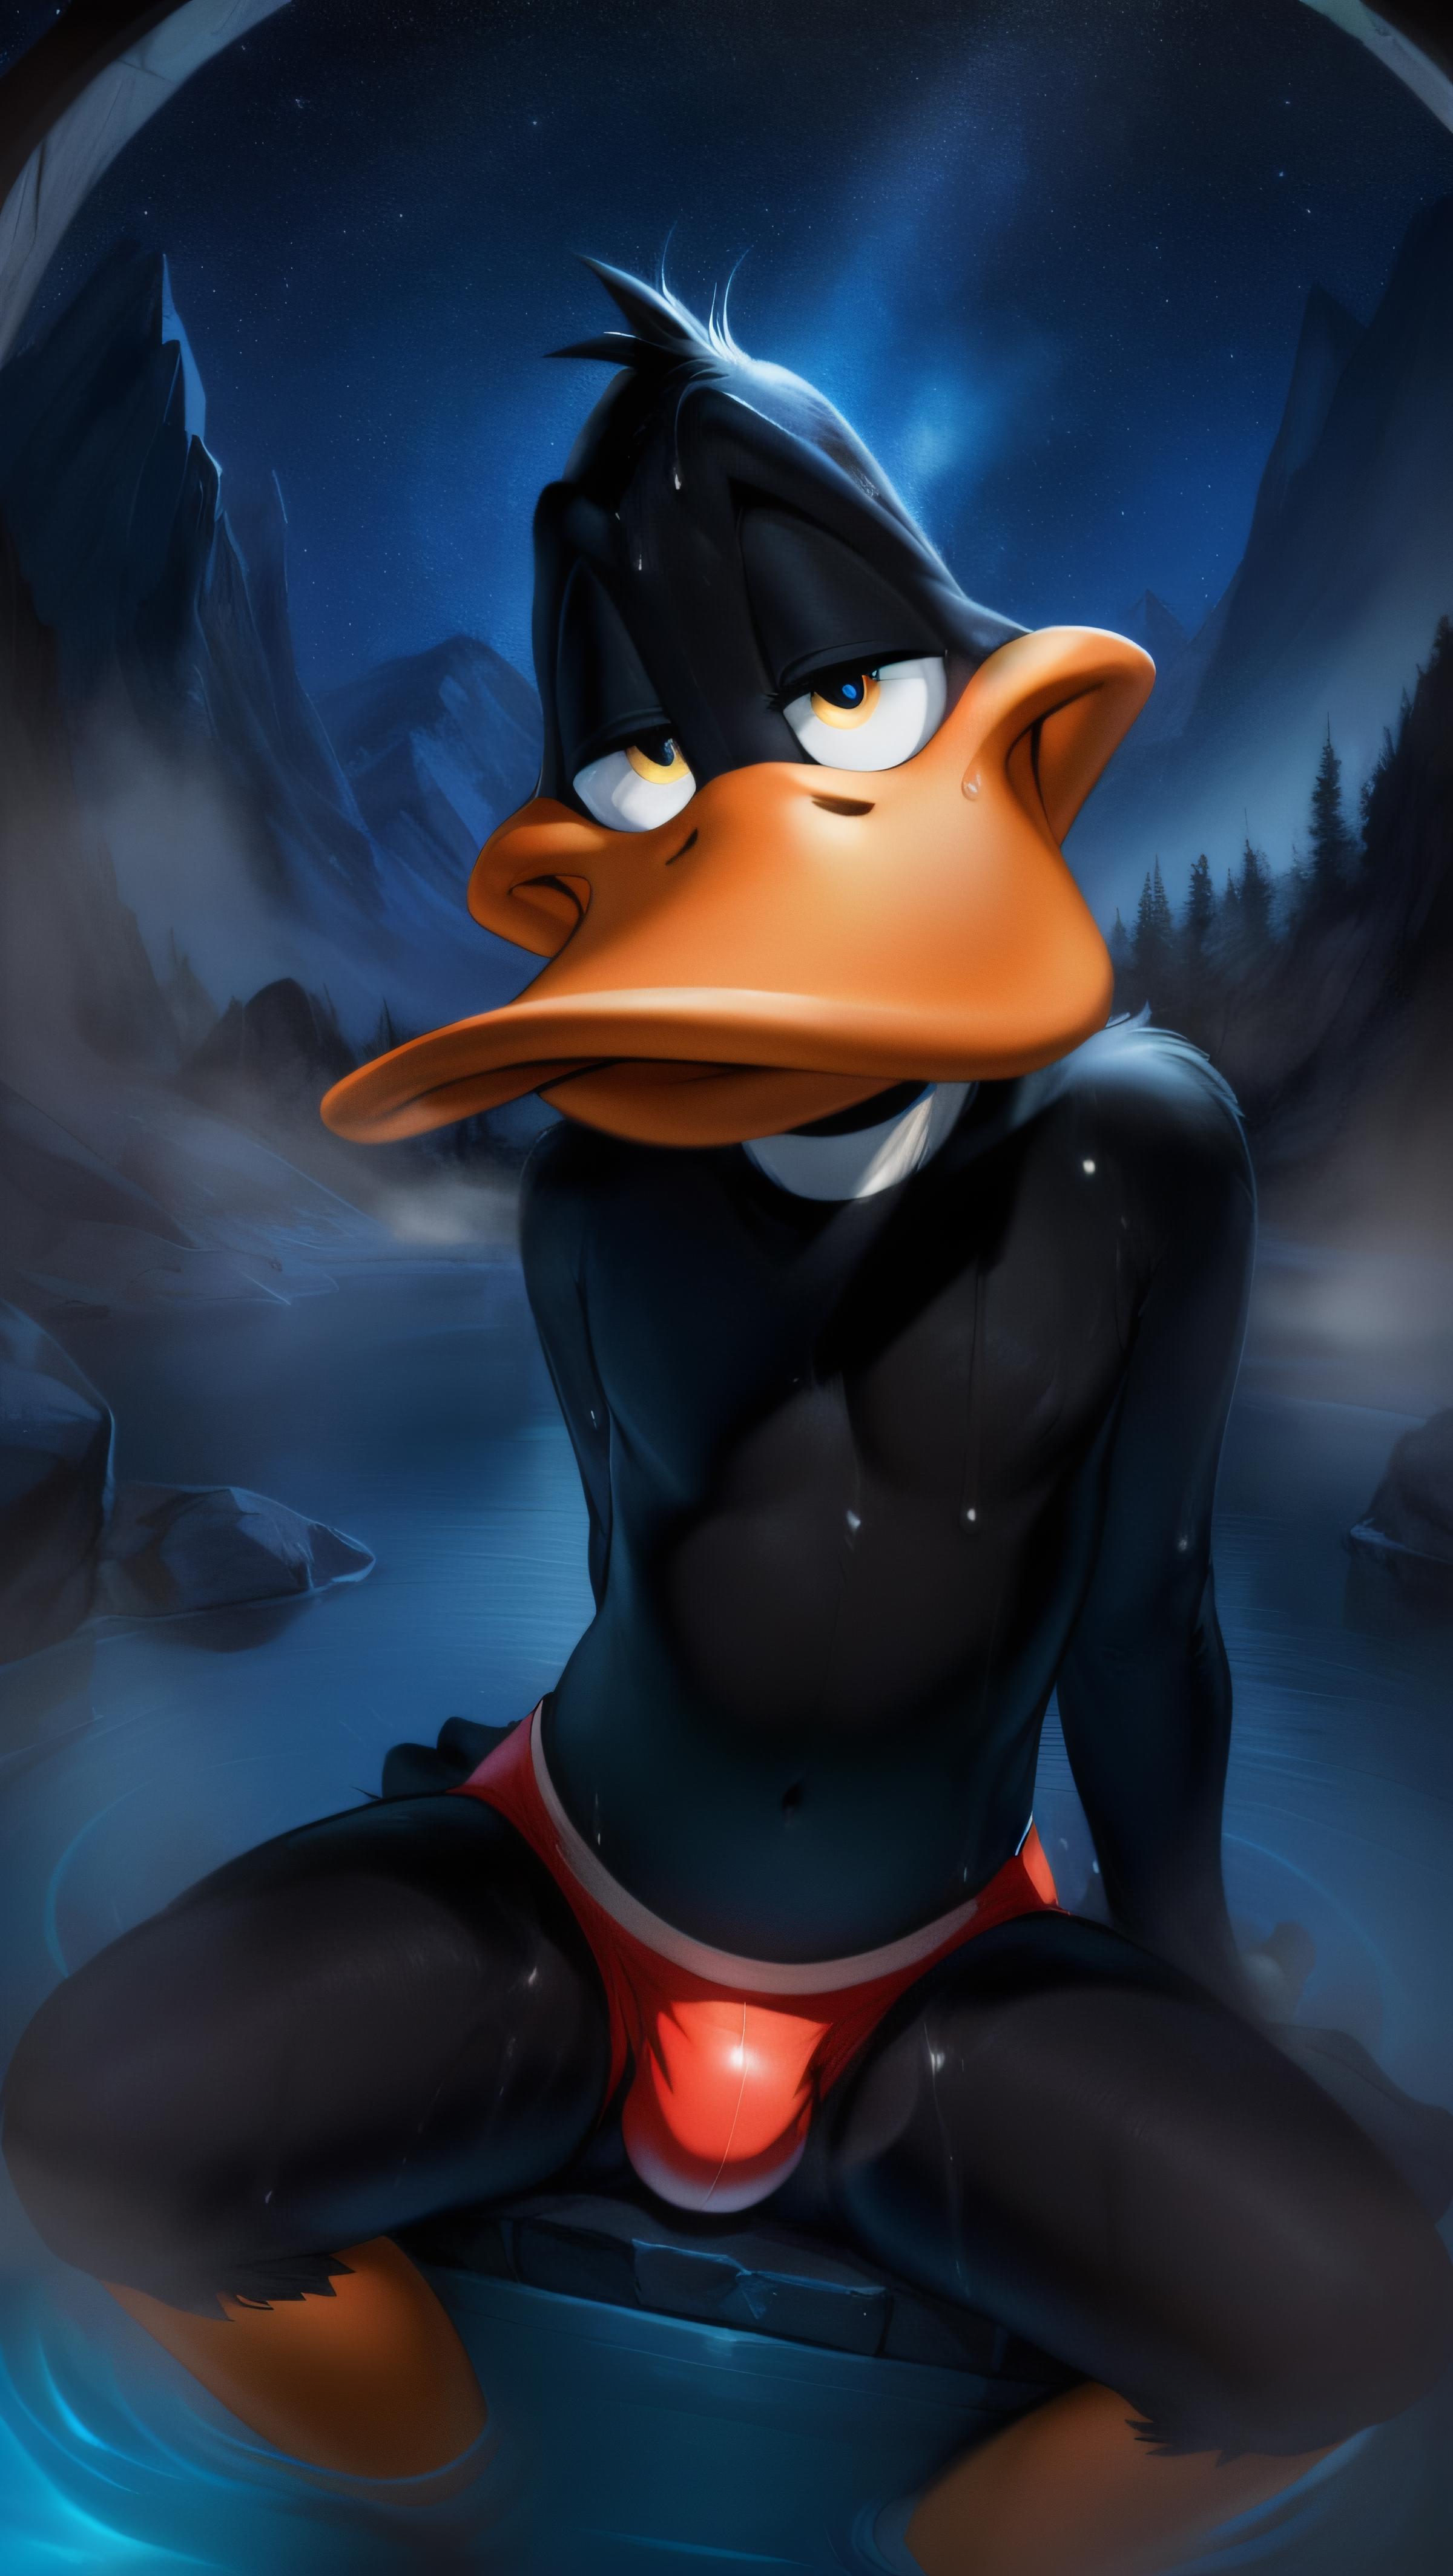 Daffy Duck image by mags_zol